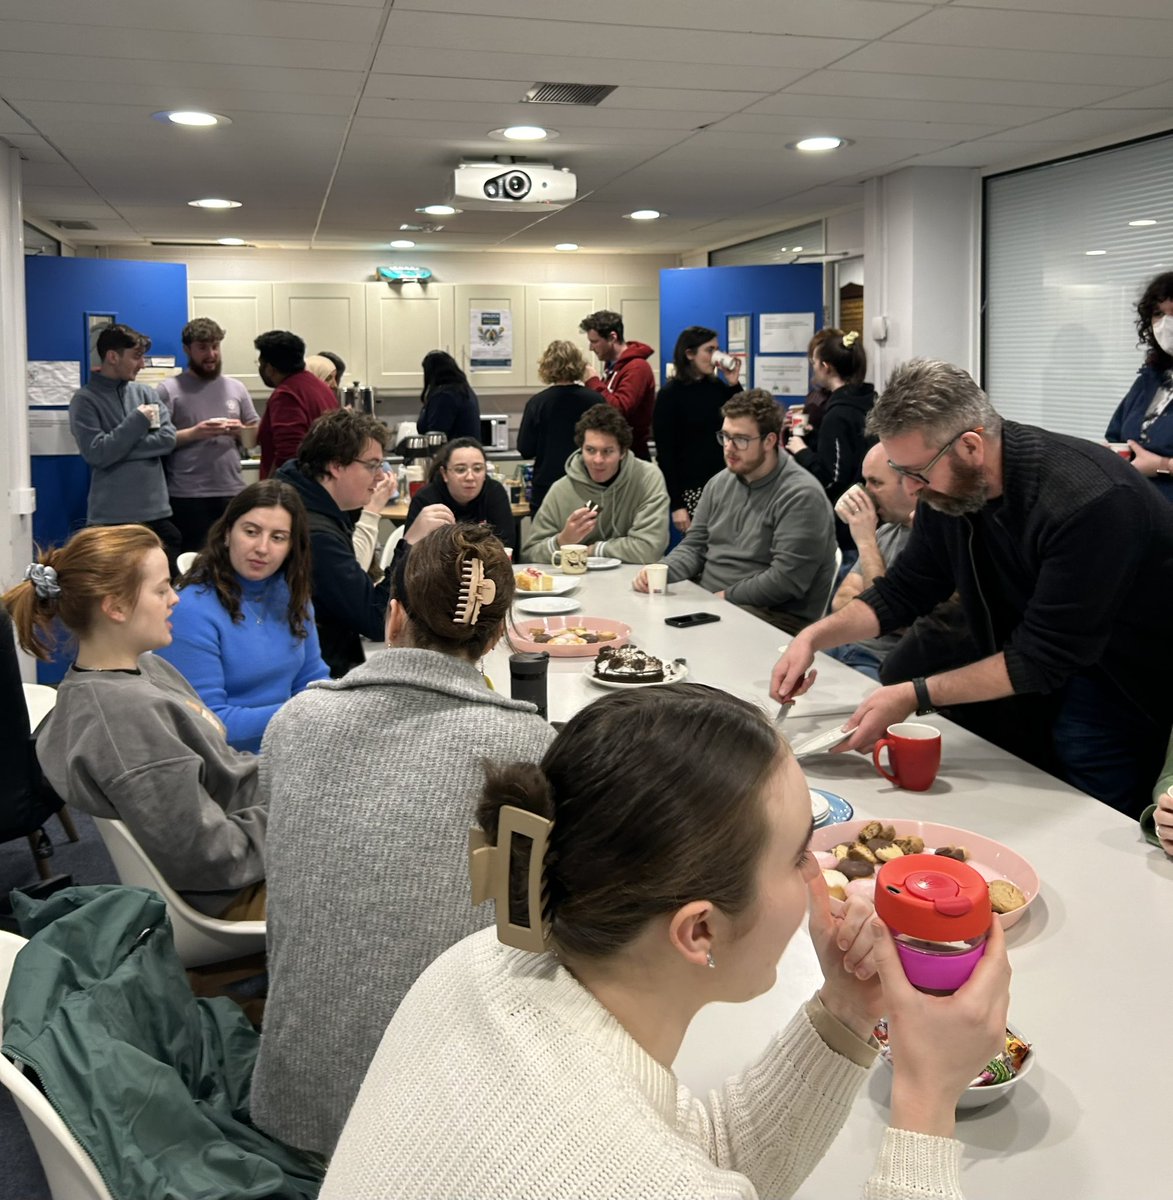 Welcome back to our first #CoffeeMorning of 2024! ☕️ 
The PGAC welcomes everyone back and wishes everyone all the best for the new year 🌠

Looking forward to seeing you all again next month! 

#ChemistryCoffeeMorning #BrewCanDoIt